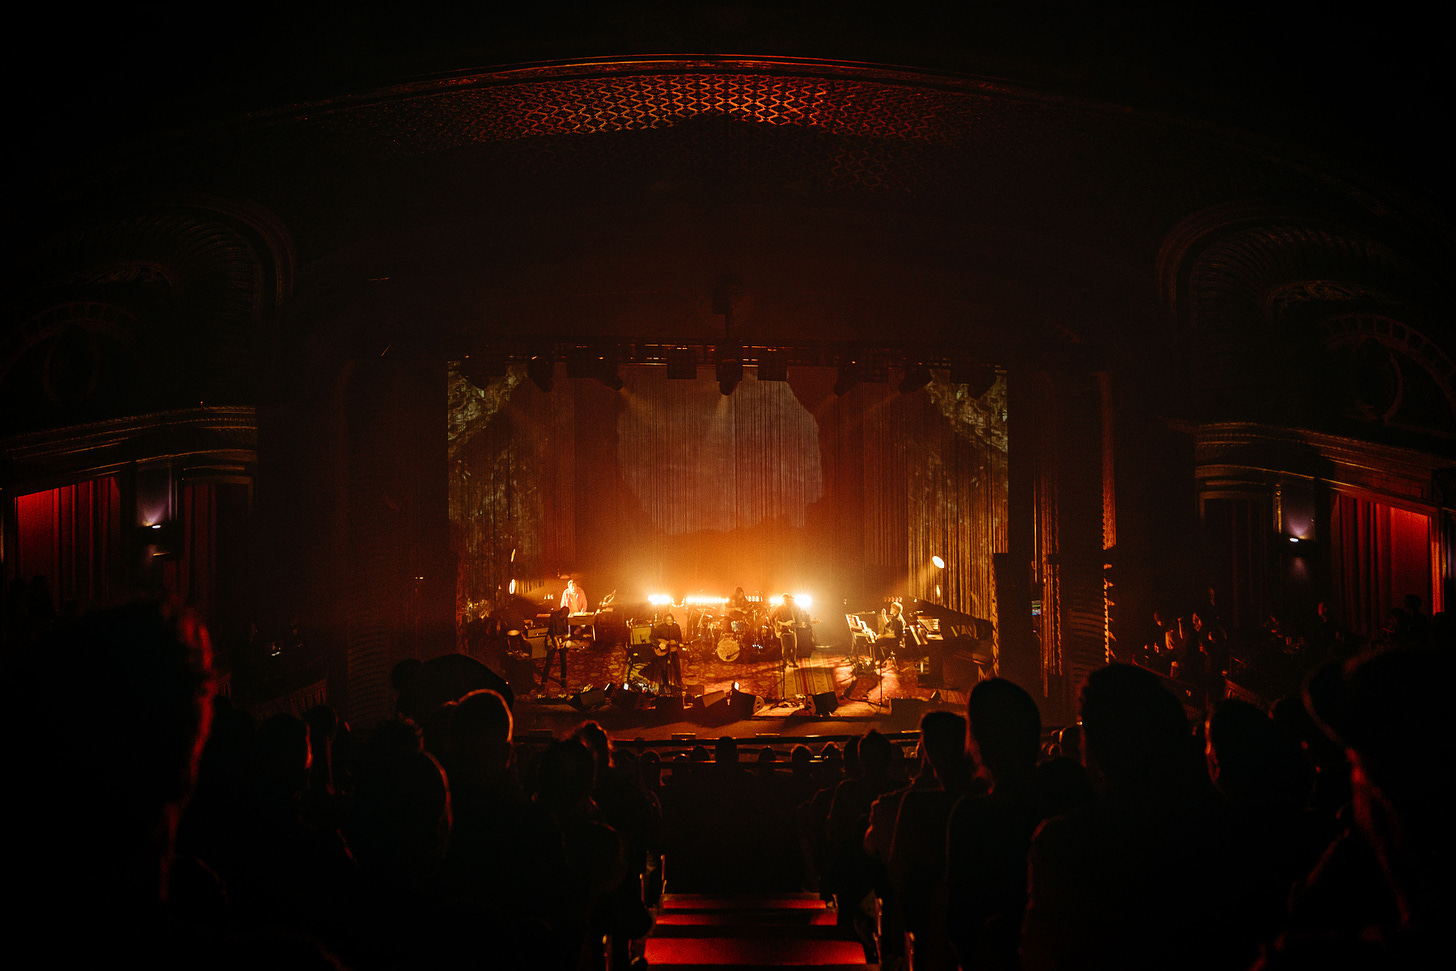 Wilco perform at the Riviera Theatre in Chicago in front of draped fiber set design.